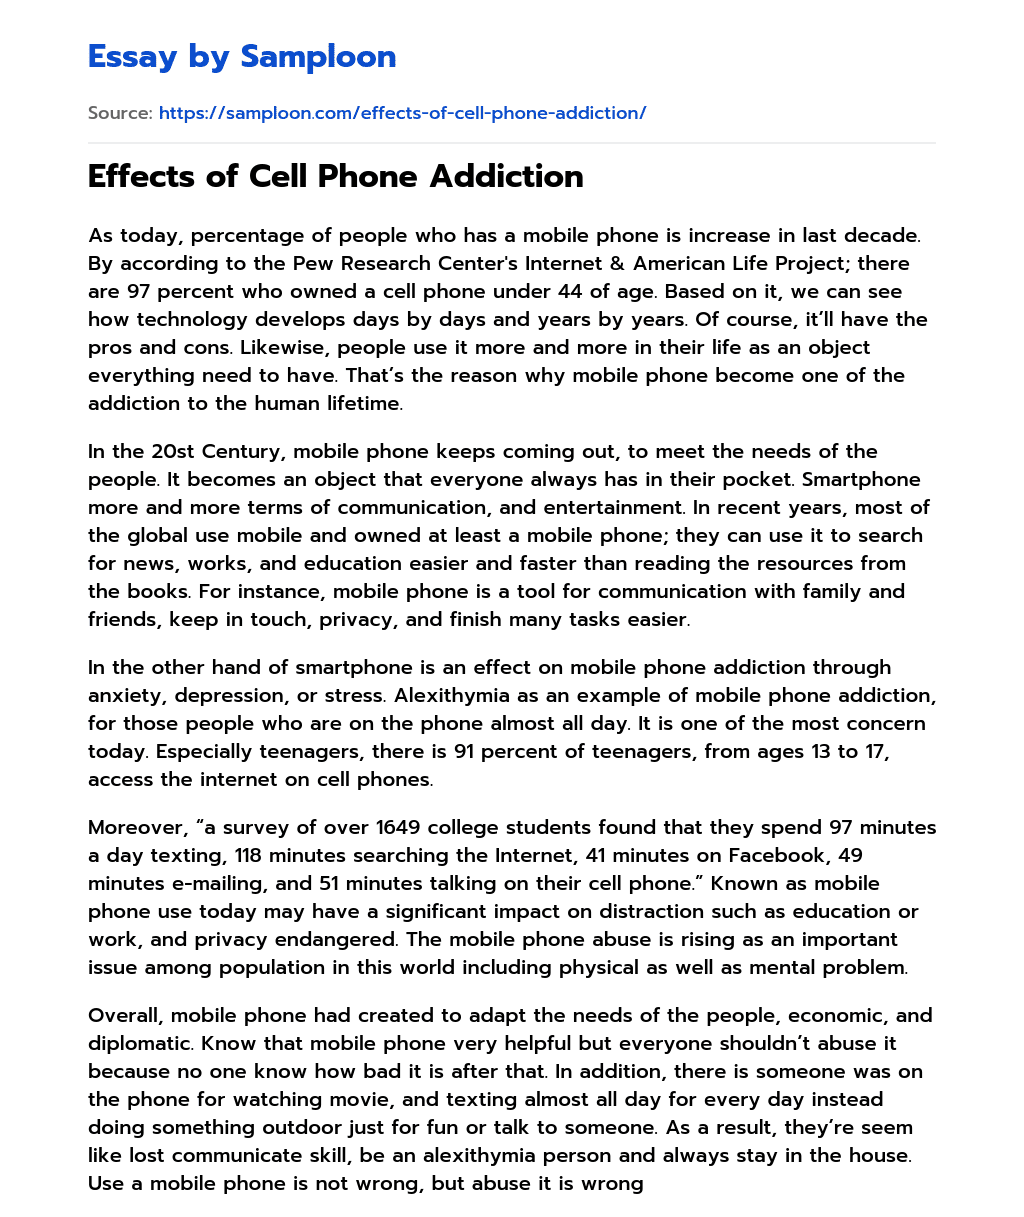 cause and effect essay about using cellphone